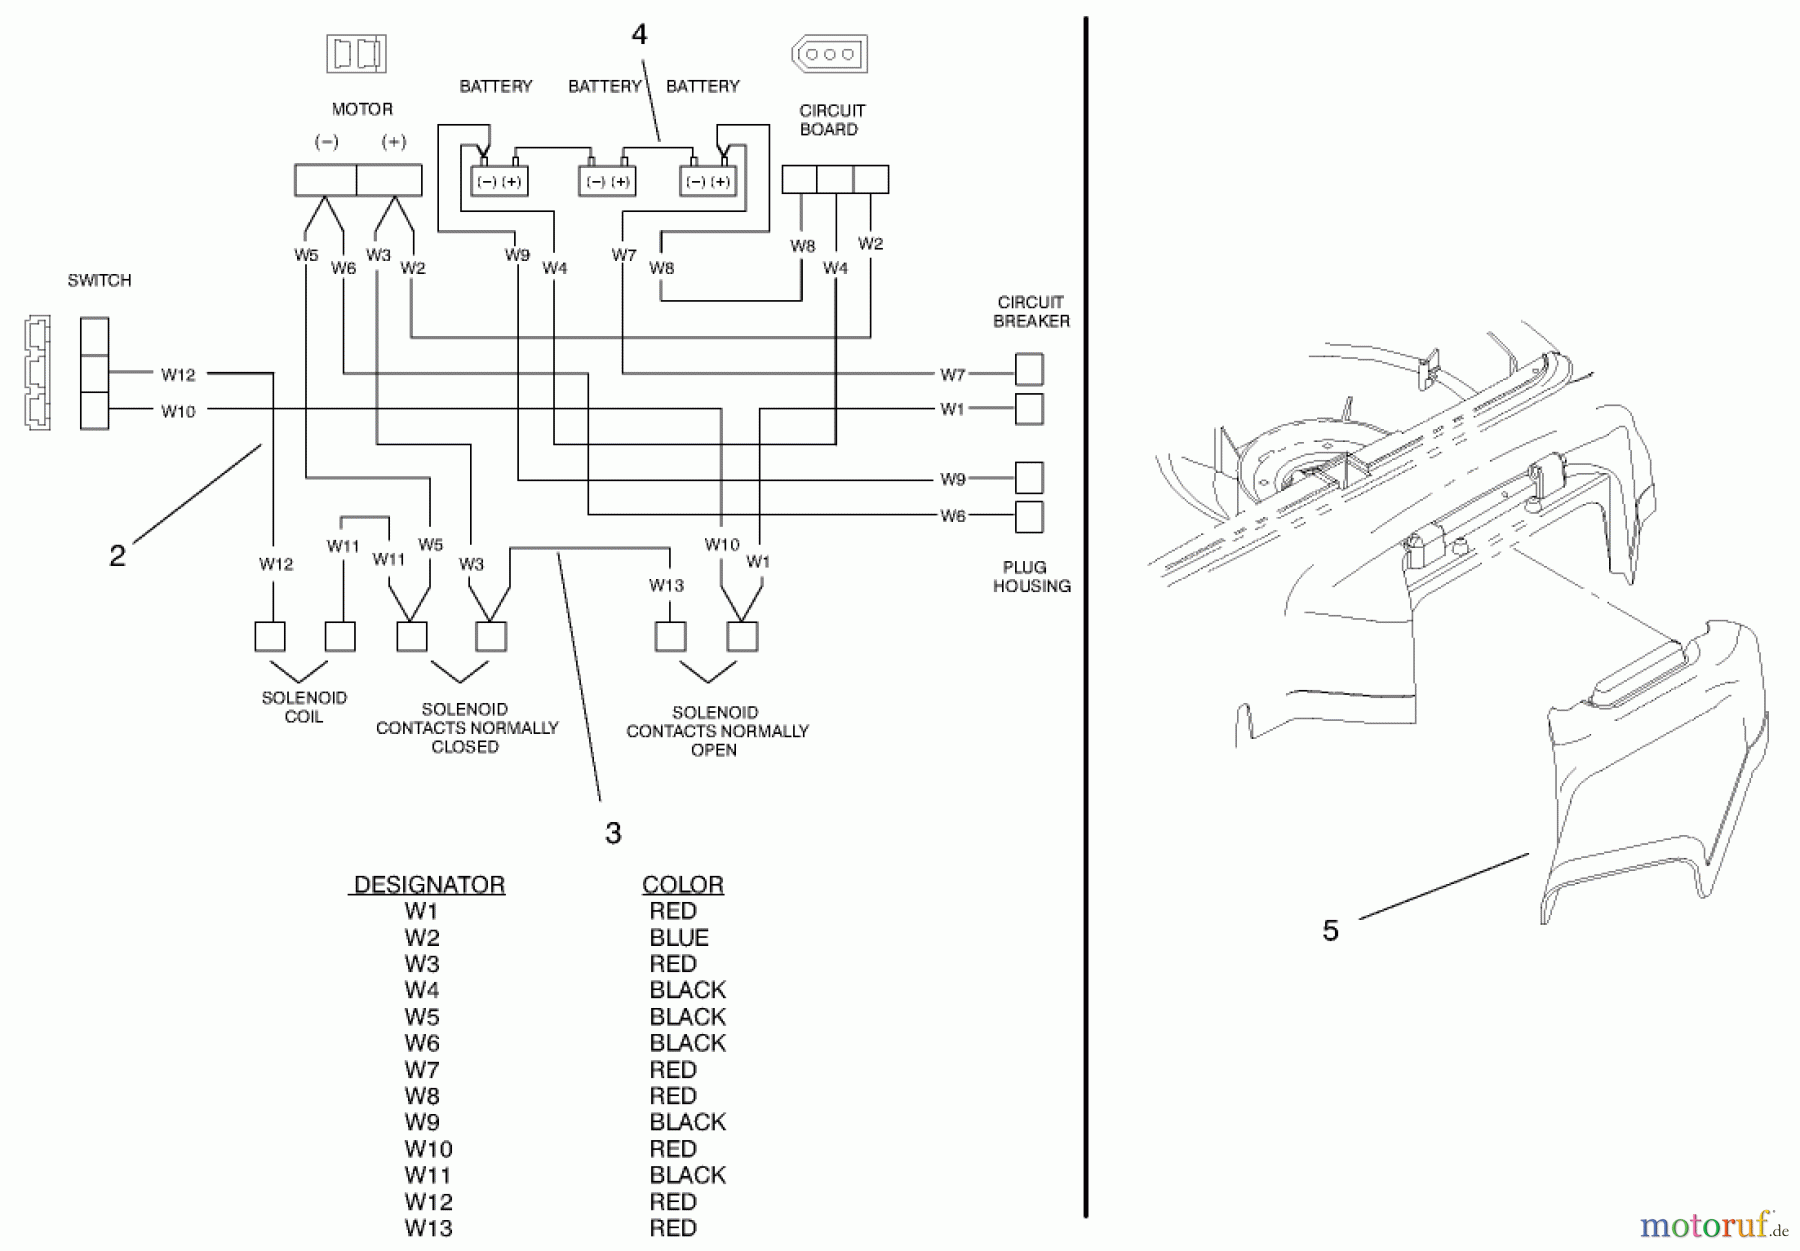  Toro Neu Mowers, Electric 20649 - Toro Carefree Electric WPM, 36 VDC, 1996 (6900001-6999999) ELECTRICAL WIRING DIAGRAM AND SIDE DISCHARGE CHUTE